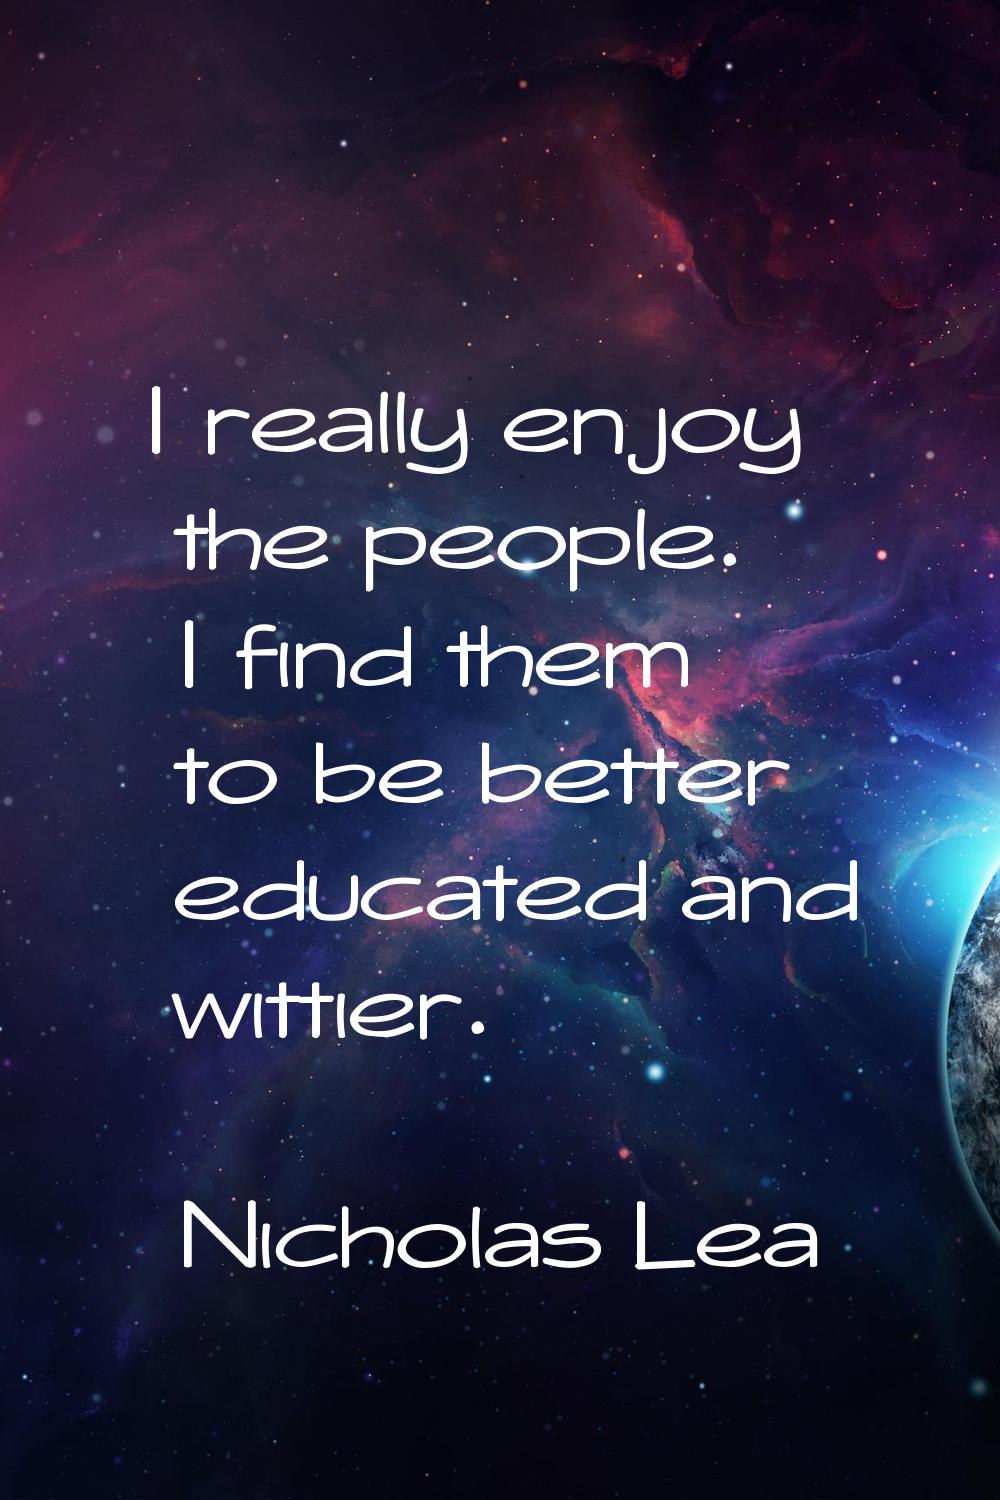 I really enjoy the people. I find them to be better educated and wittier.